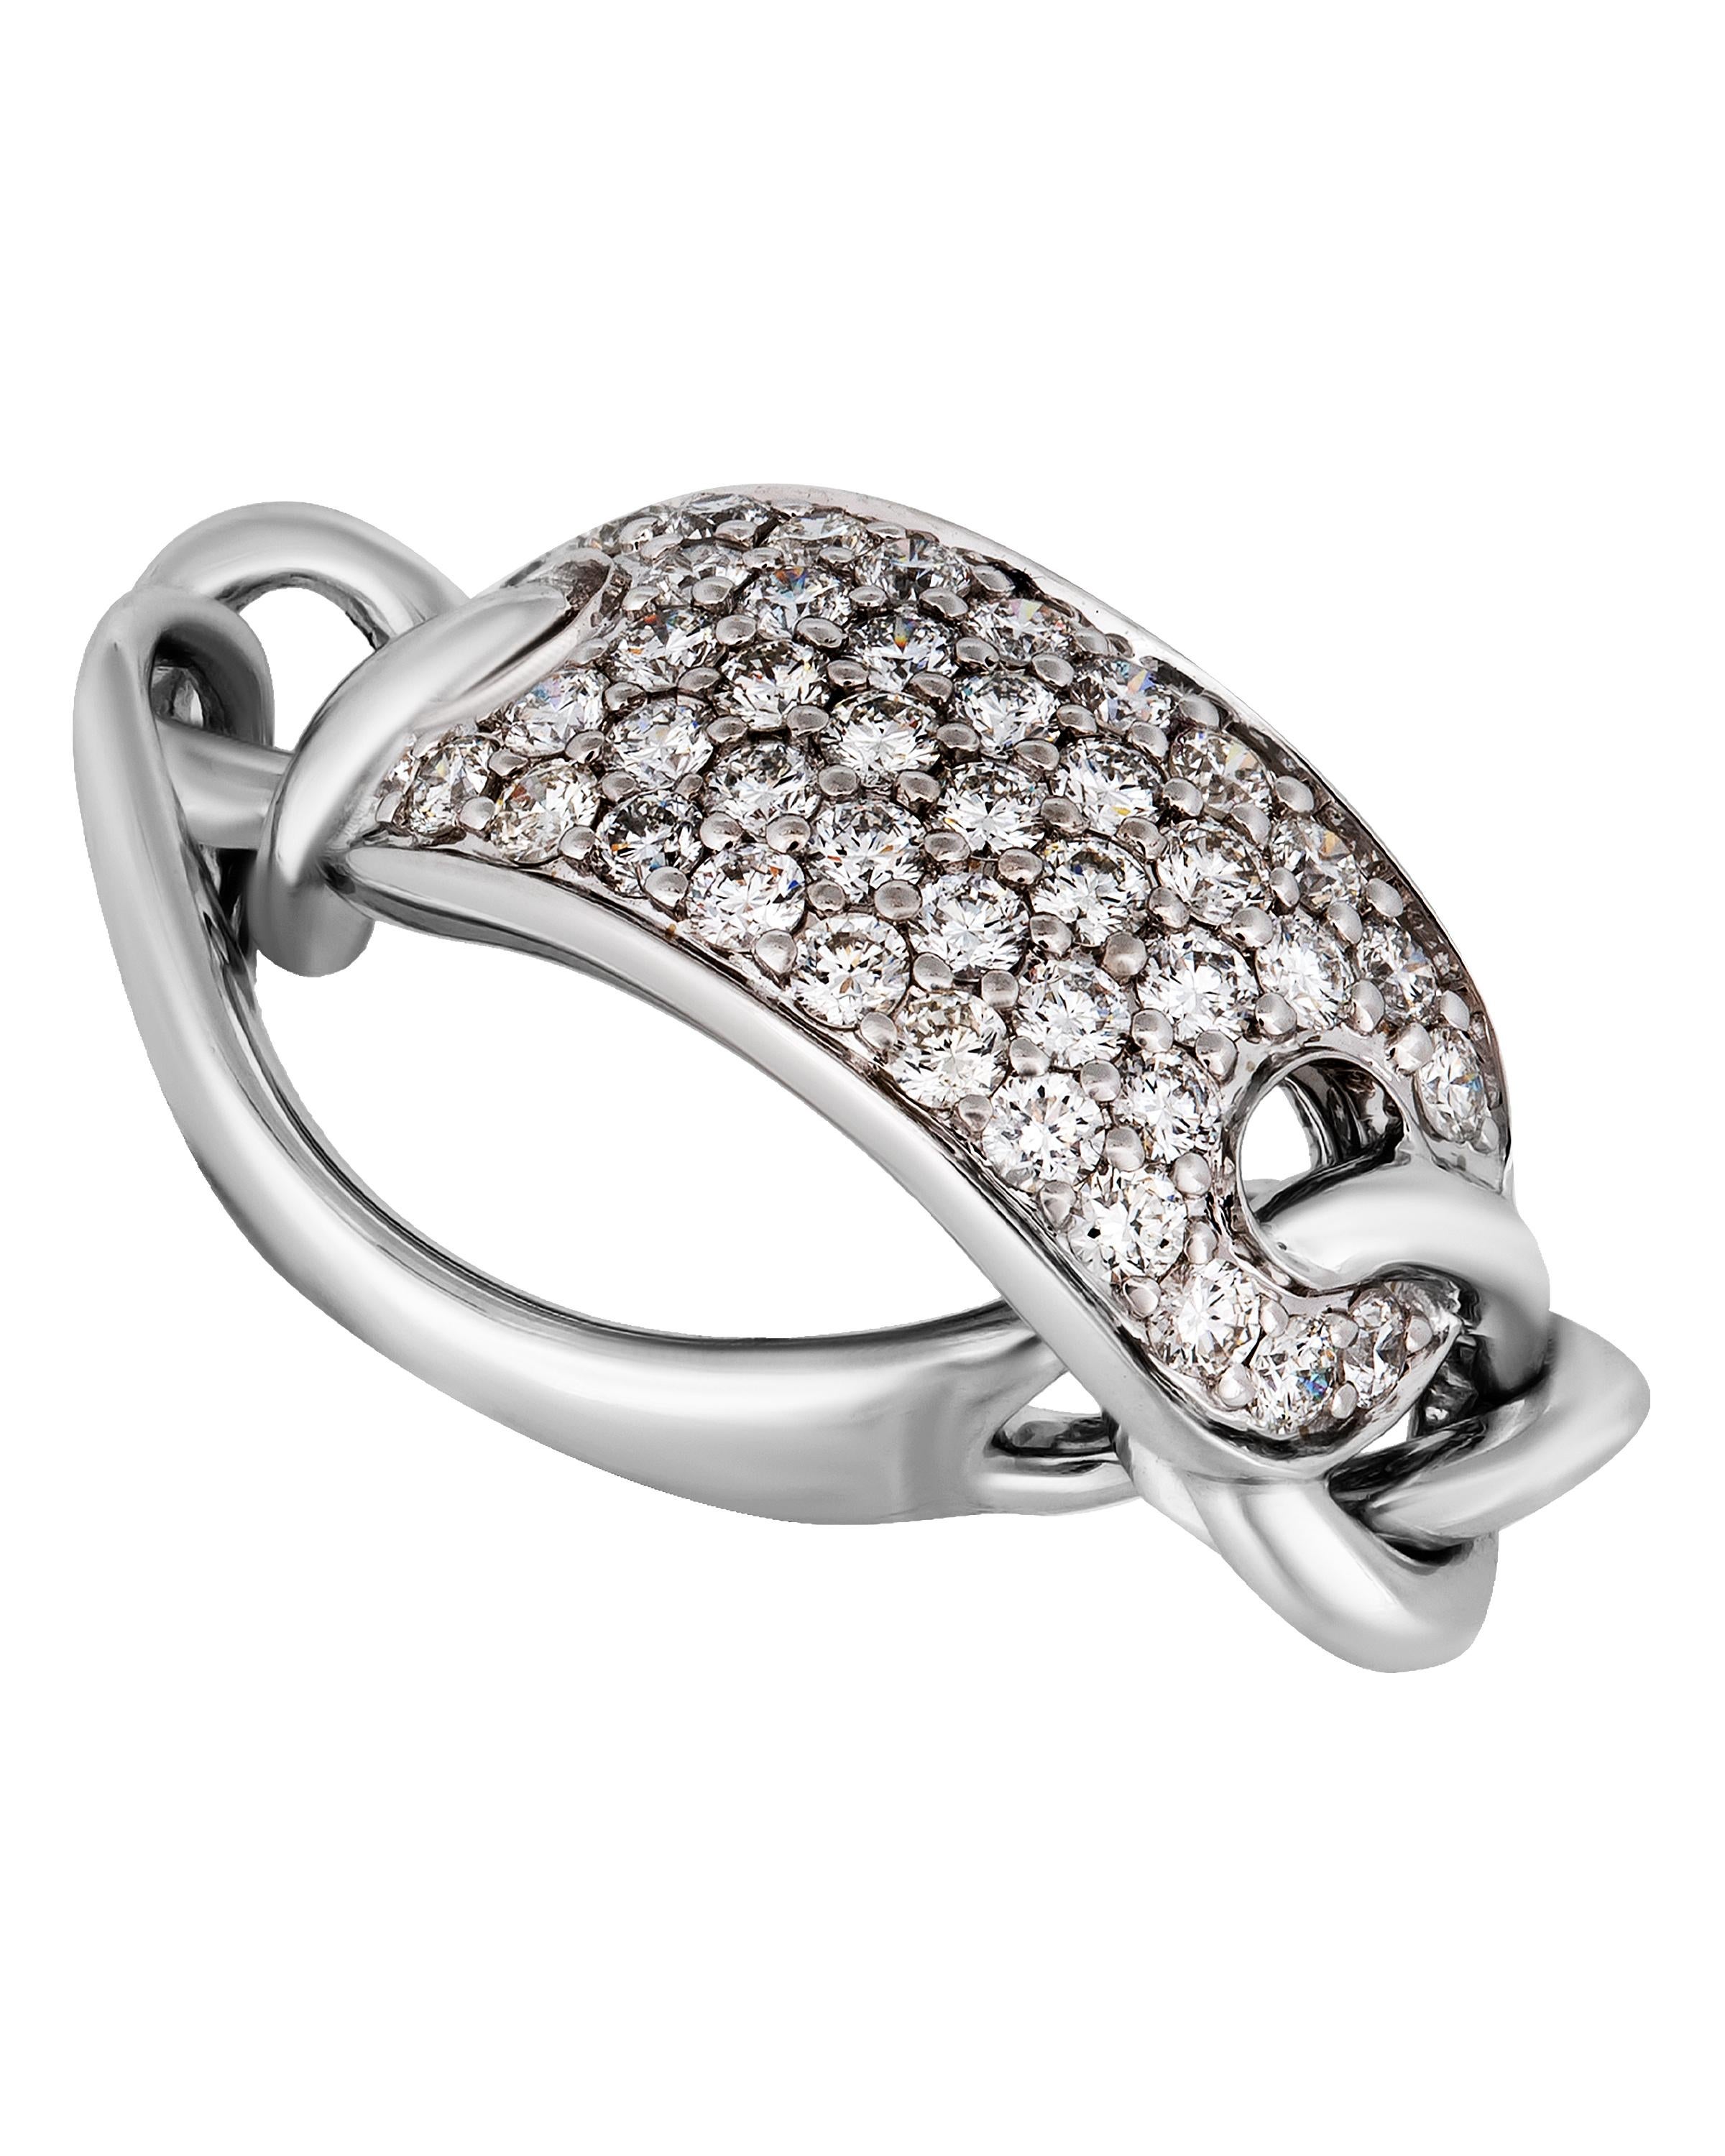 This glittering Piero Milano 18K White Gold Link Ring features a dazzling diamond station 0.91ct. tw. linked to a luscious white gold band. The ring size is 6.25 (52.5). The Decoration Size is 9mm. The Weight is 6.4g. Diamond Color: G-H. Diamond